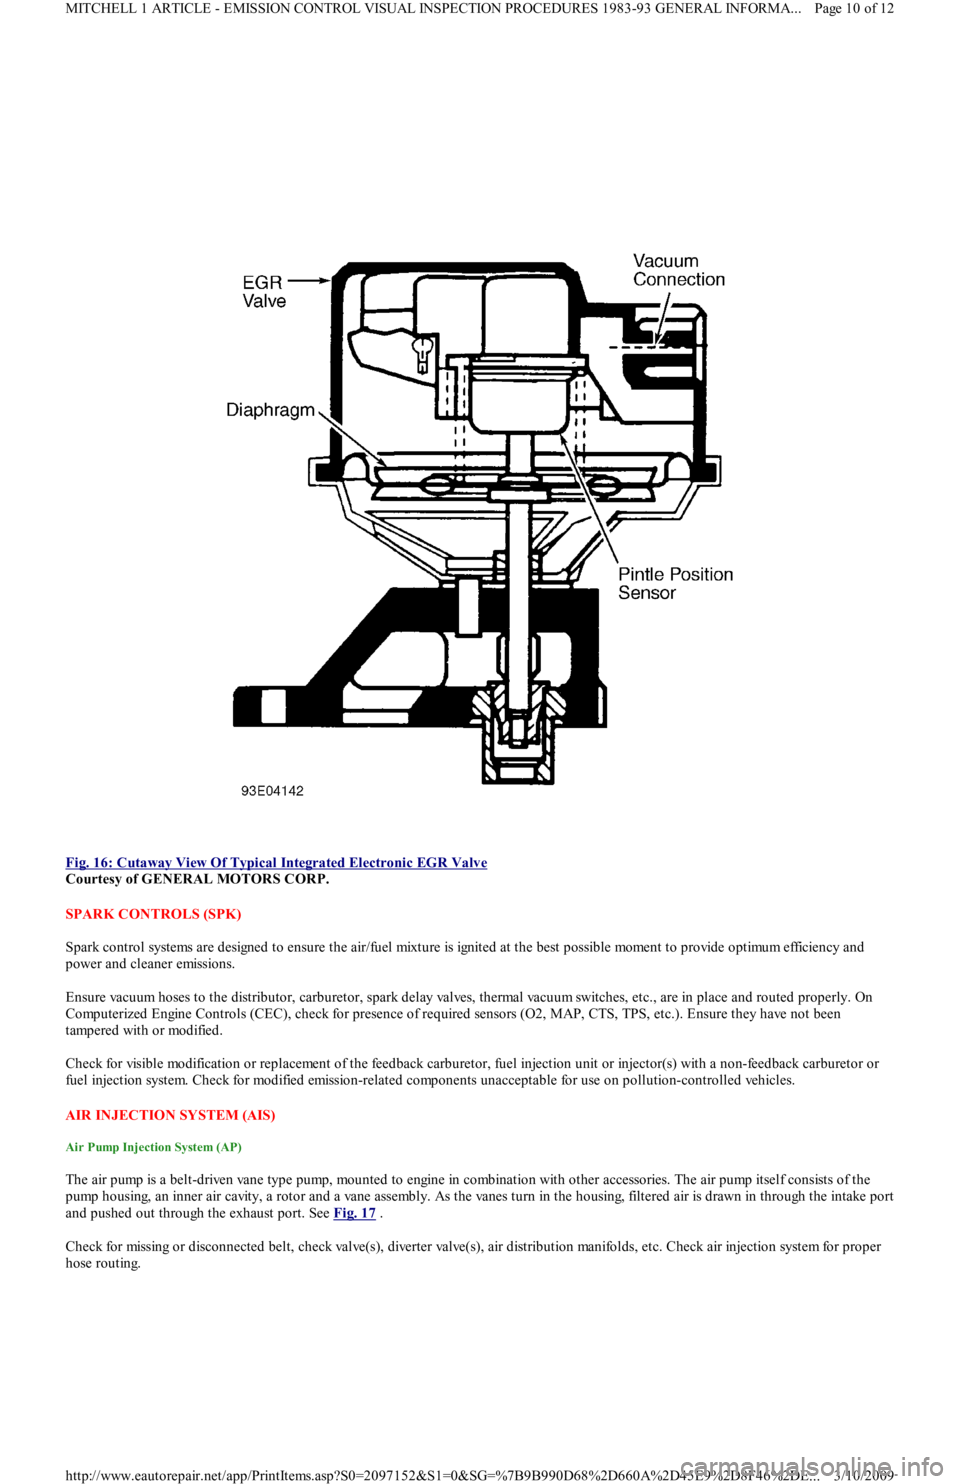 FORD FESTIVA 1991  Service Manual  
Fig. 16: Cutaway View Of Typical Integrated Electronic EGR Valve
 
Courtesy of GENERAL MOTORS CORP. 
SPARK CONTROLS (SPK) 
Spark control systems are designed to ensure the air/fuel mixture is ignite